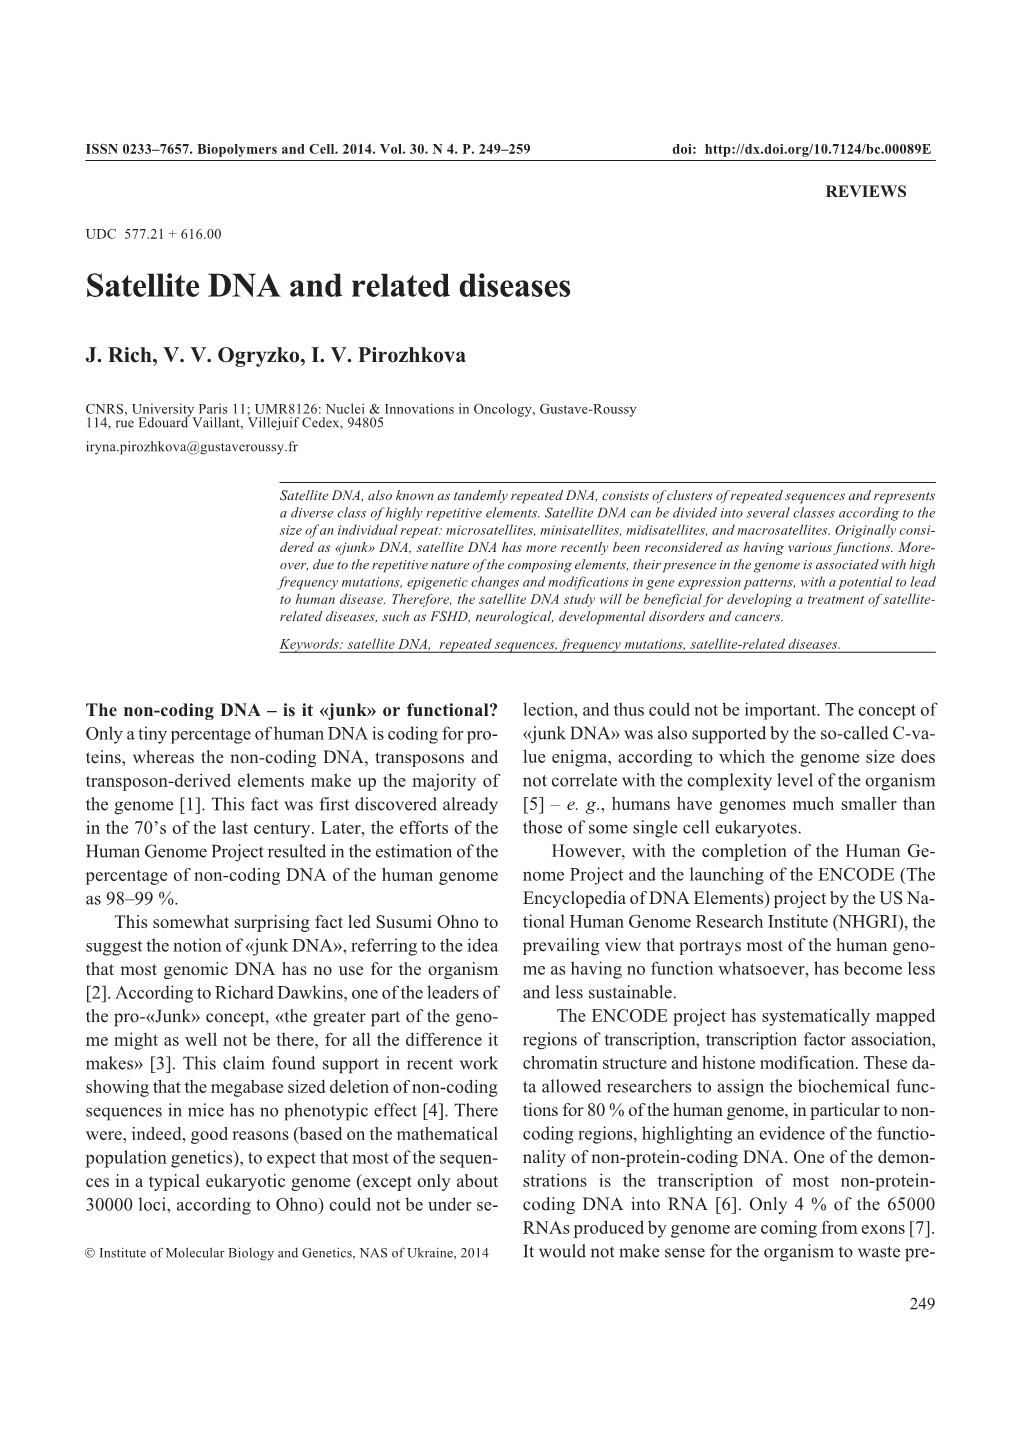 Satellite DNA and Related Diseases